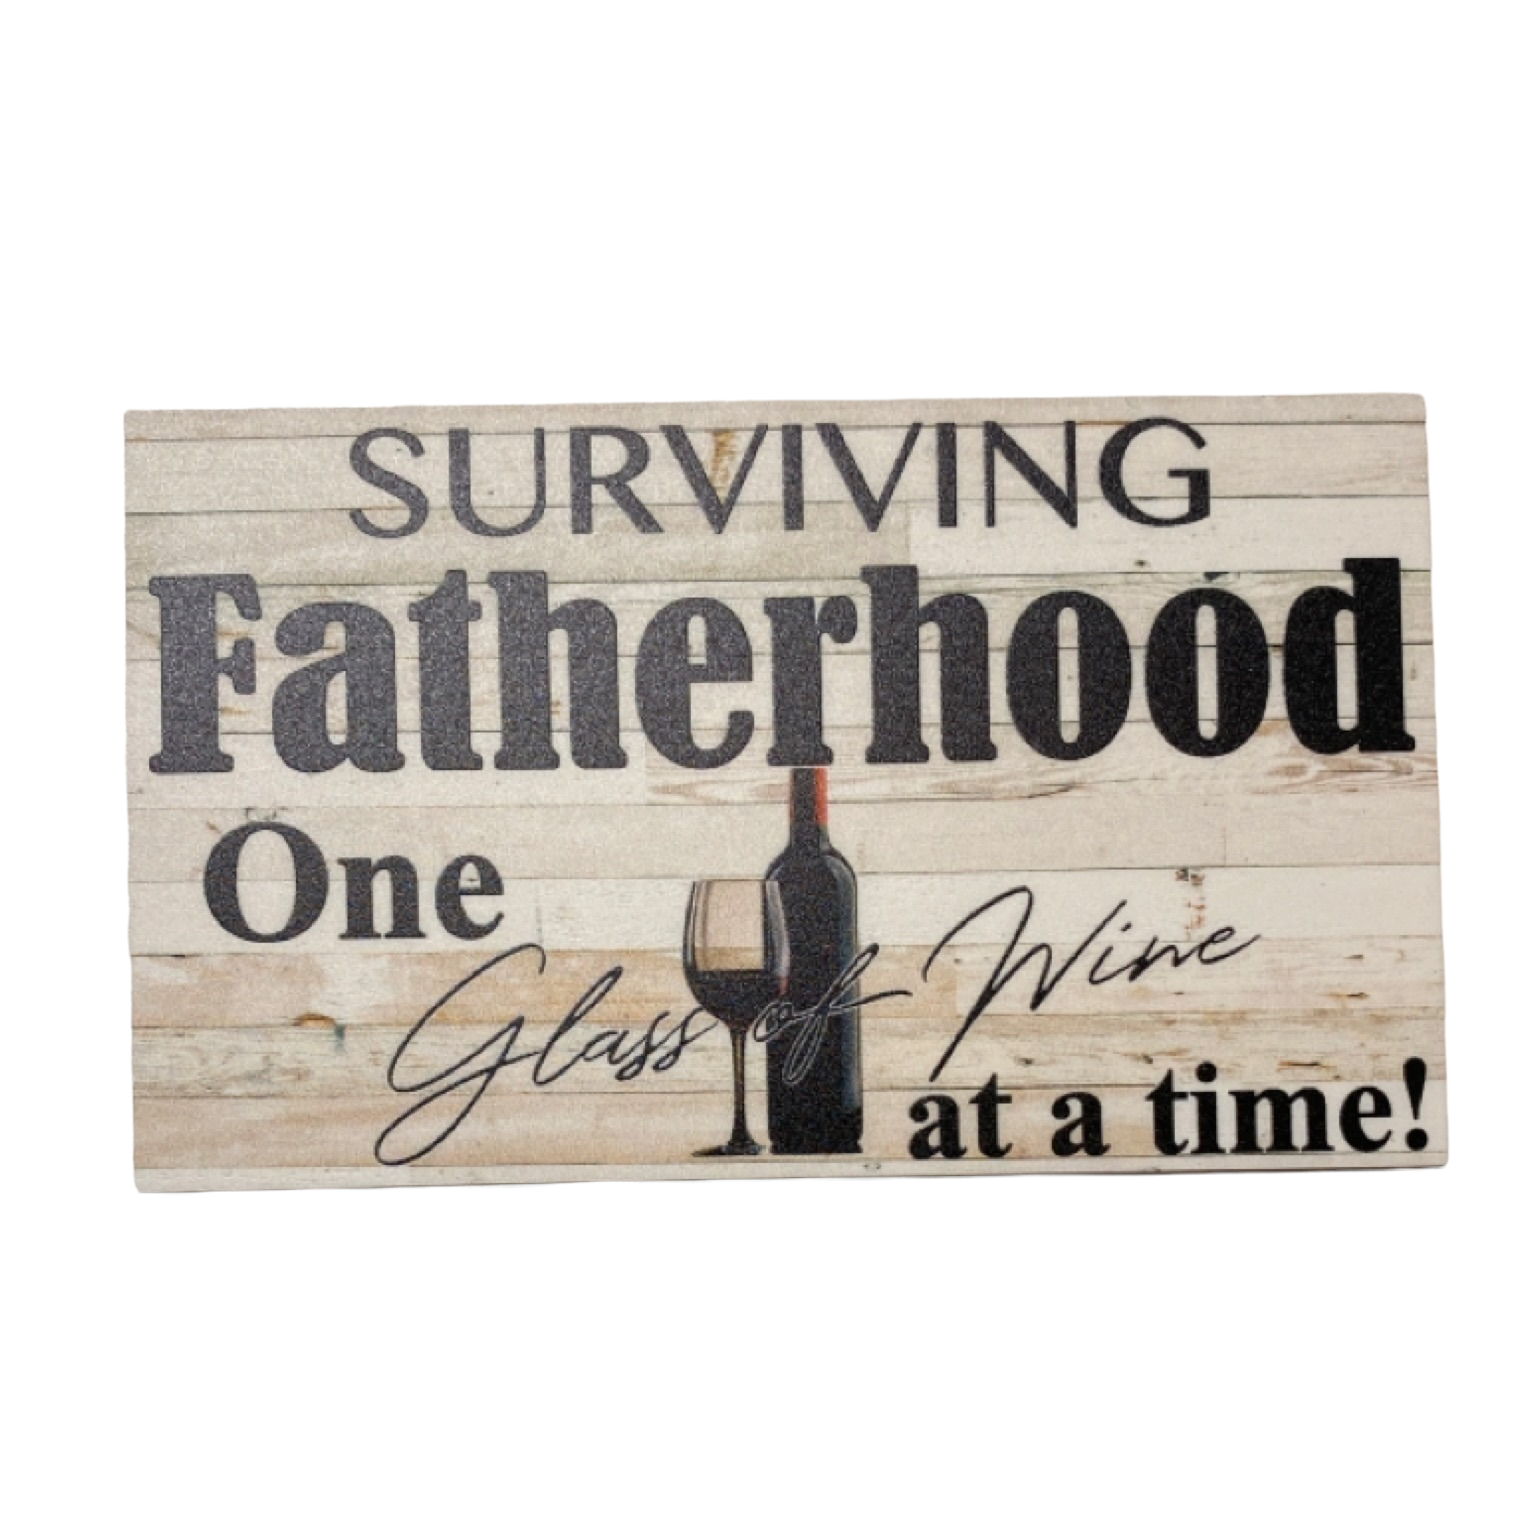 Surviving Fatherhood Dad Wine Sign - The Renmy Store Homewares & Gifts 